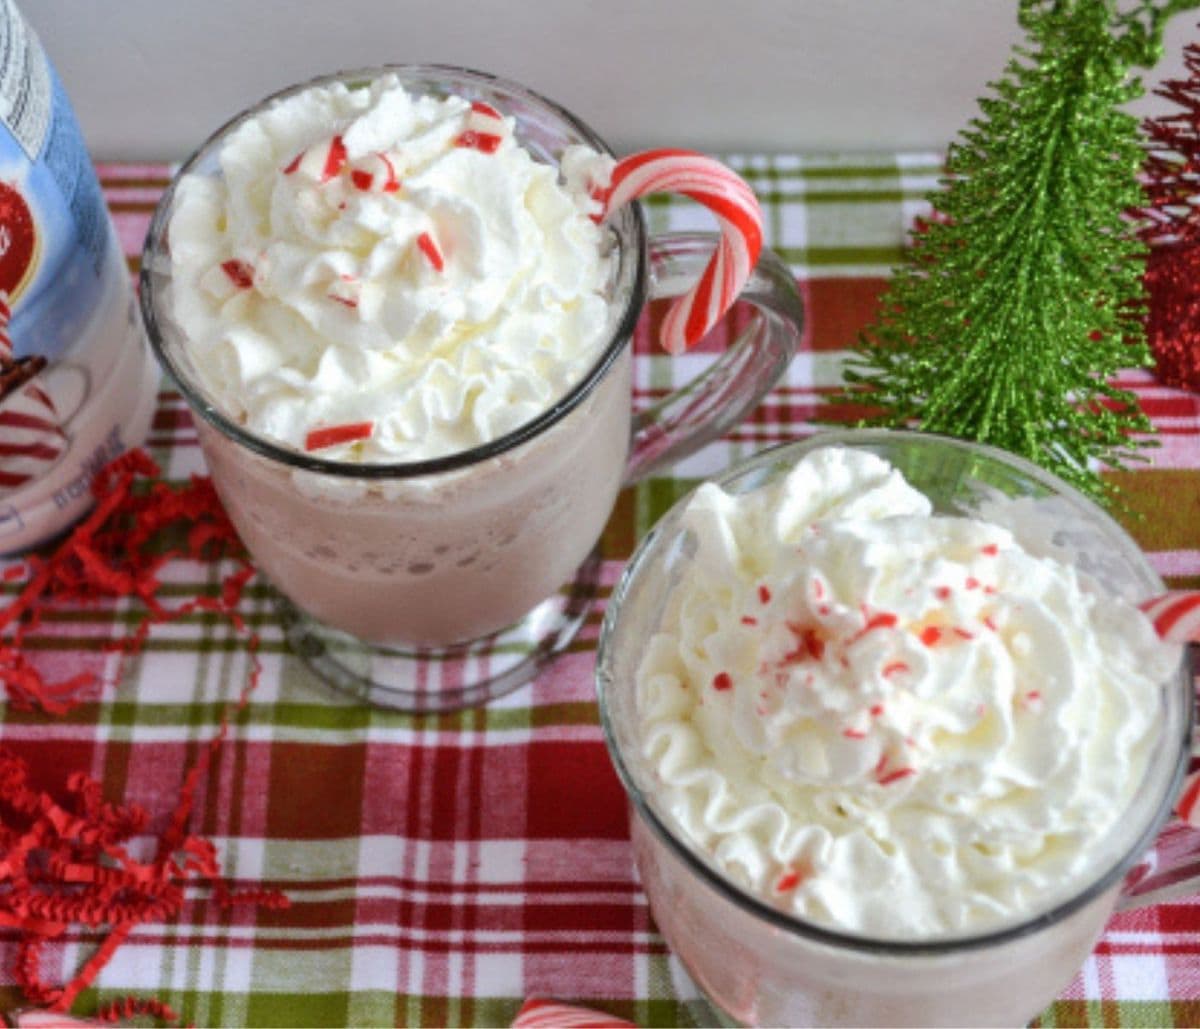 Peppermint Mocha Frozen Hot Cocoa made with Coffeemate Peppermint Mocha Creamer